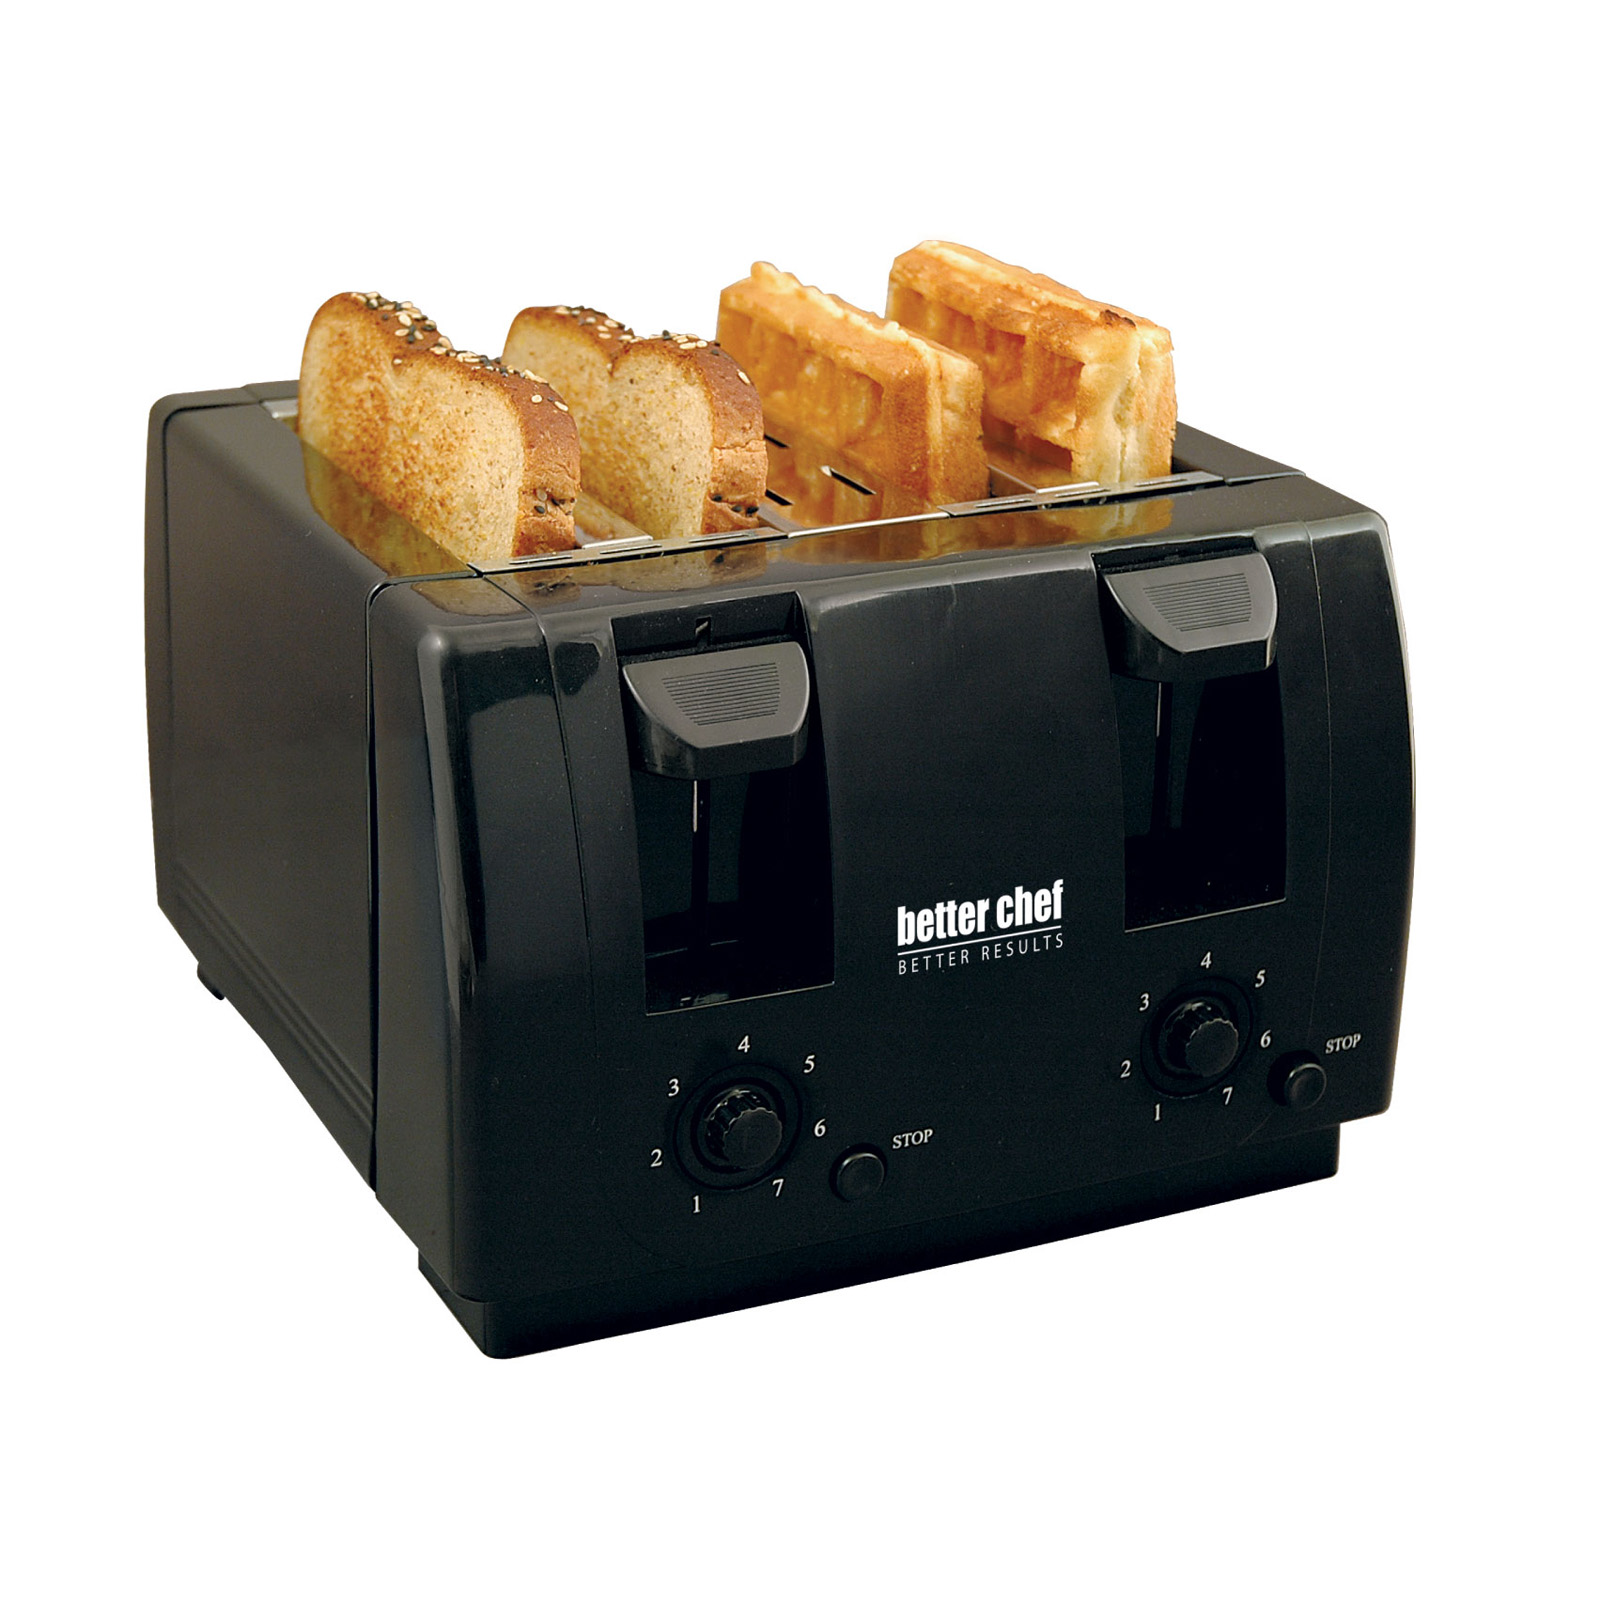 Better Chef 97080213M 4-Slice Dual Control Toaster - Black